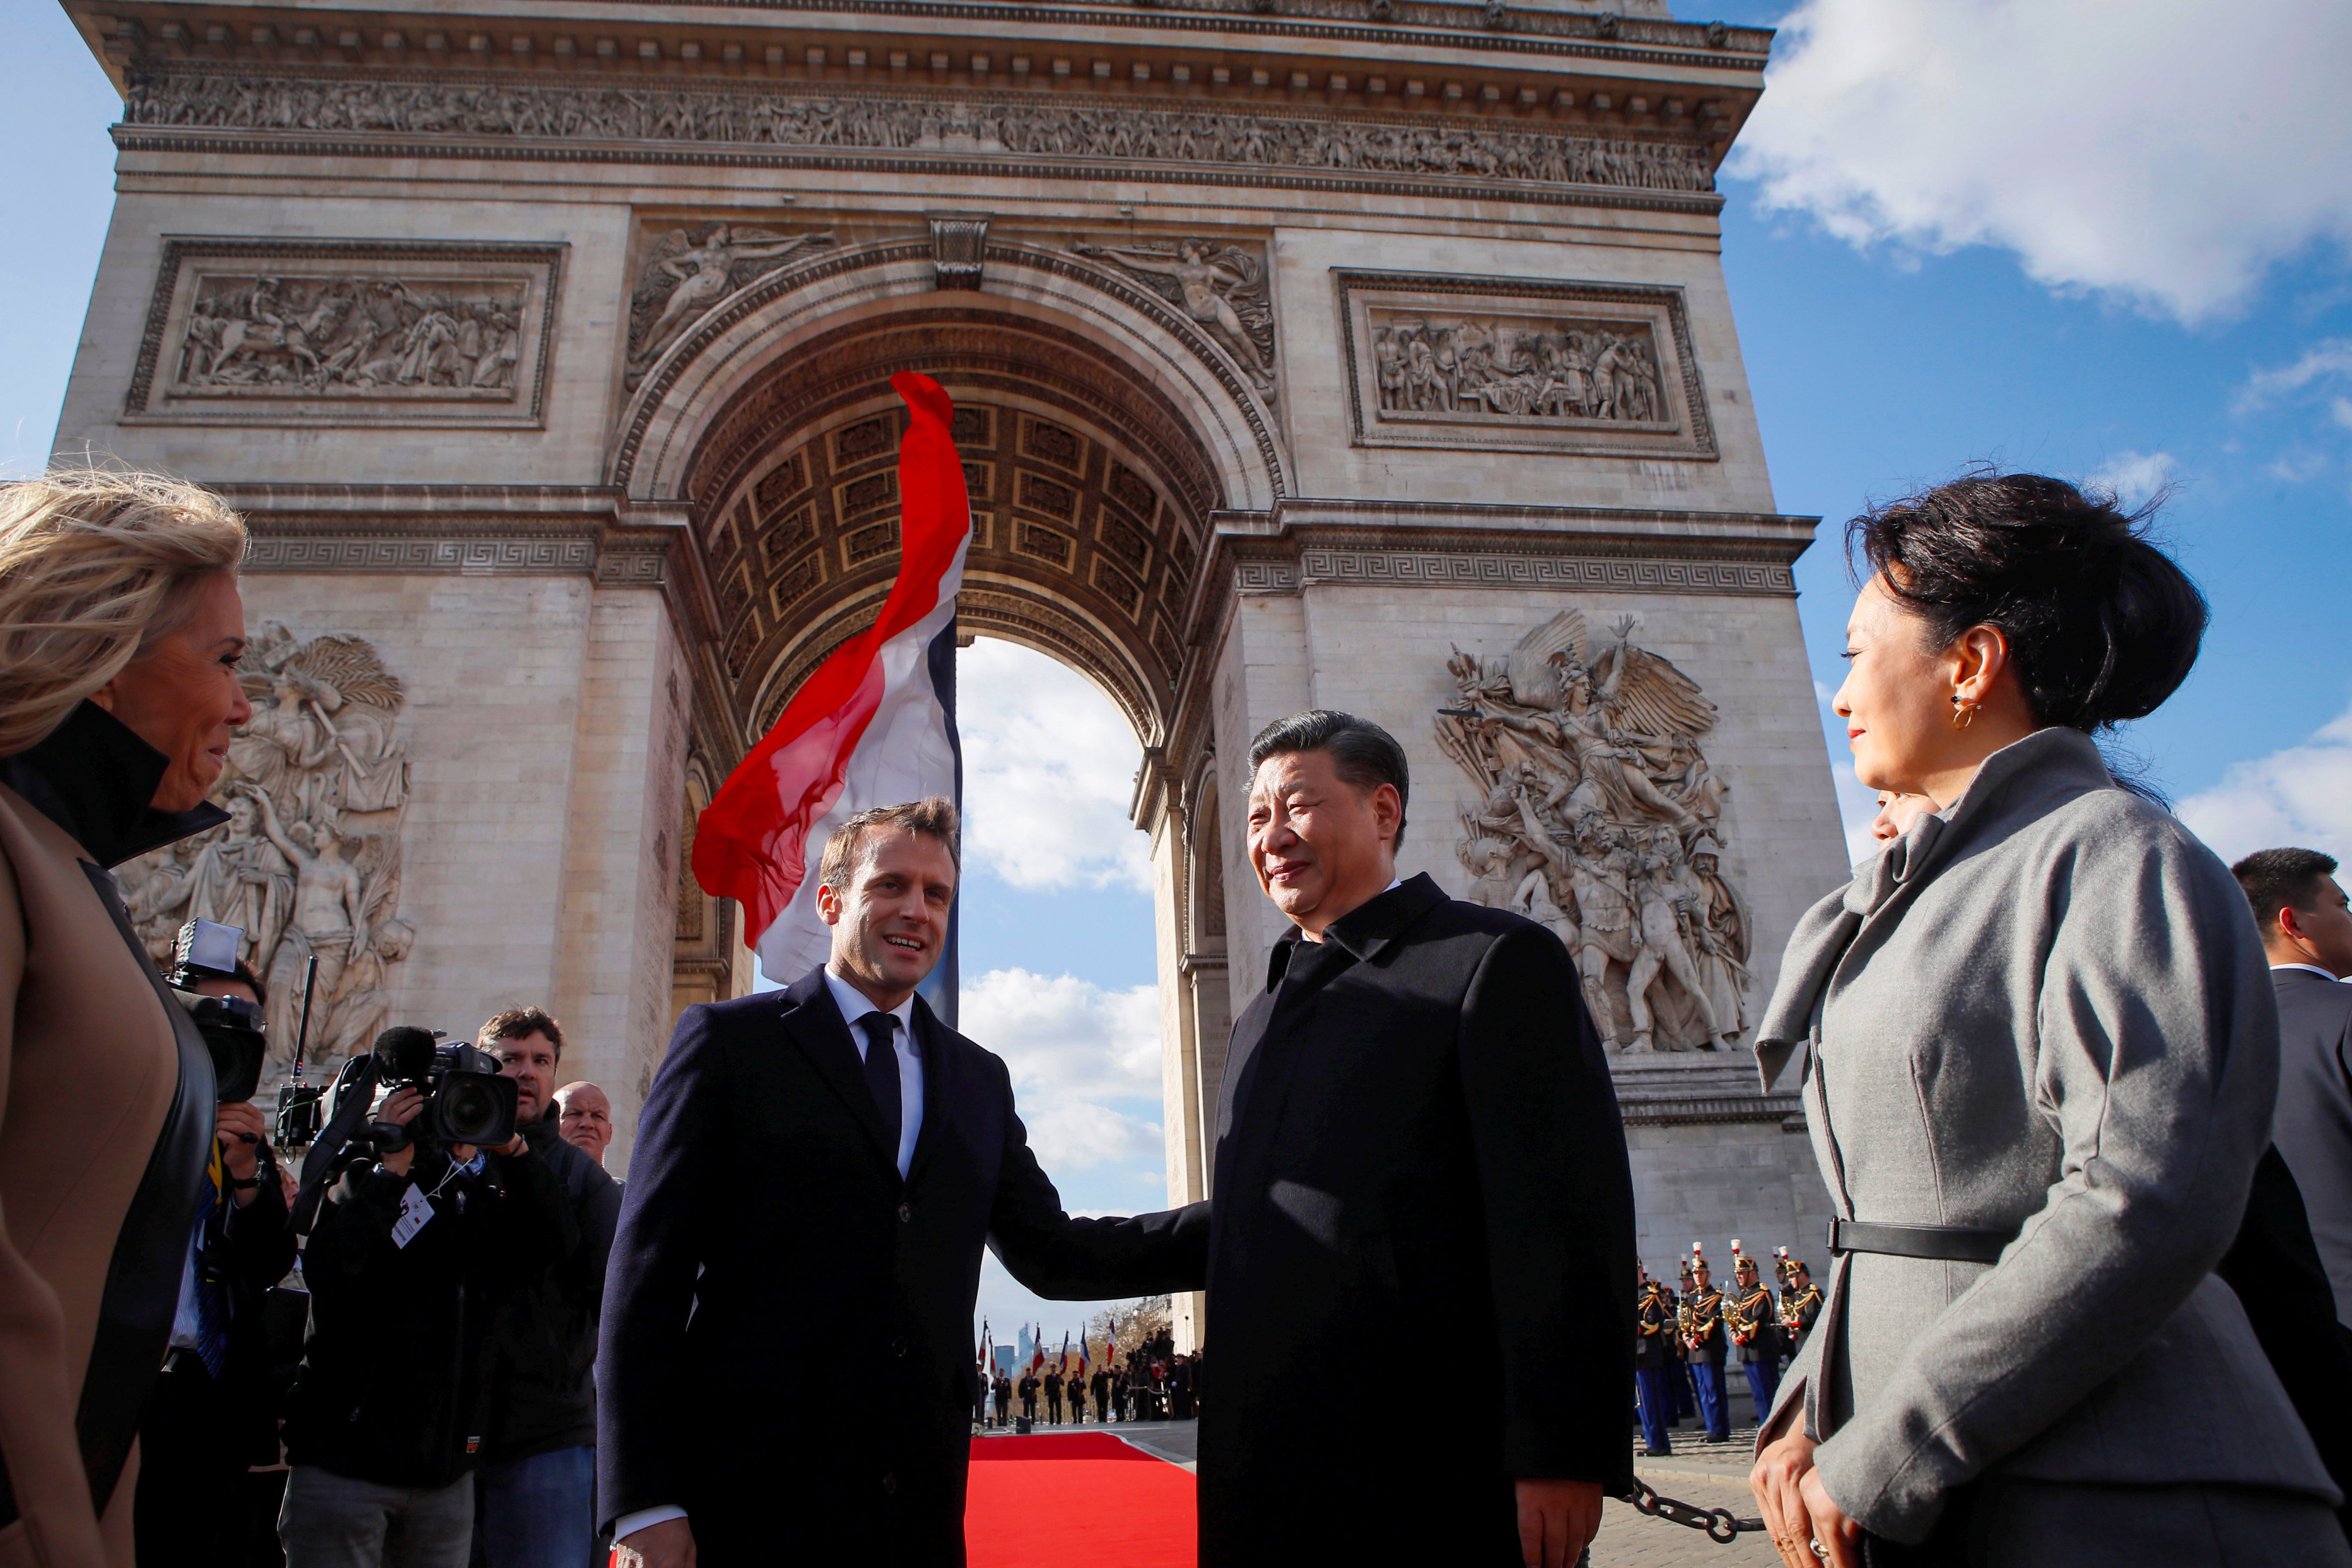 French President Emmanuel Macron meets Chinese President Xi Jinping at the Arc de Triomphe monument in March 2019. France is expected to be on the itinerary again when Xi visits Europe for the first time since the pandemic. Photo: Reuters